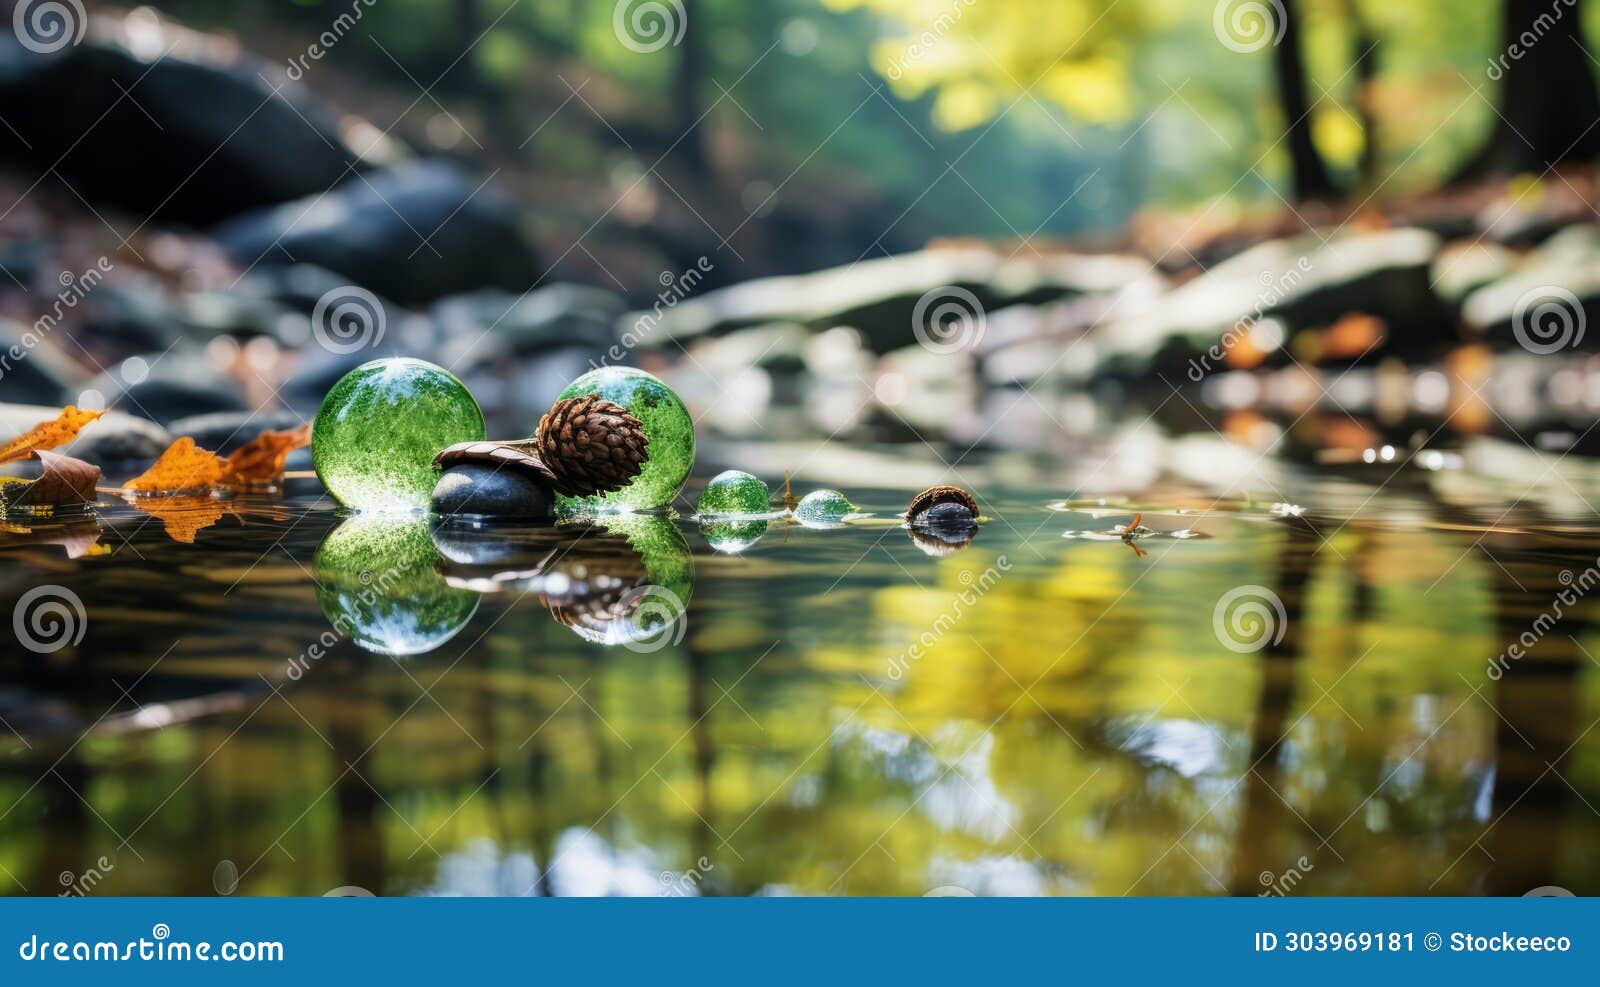 Floating Glass Balls: Adventurecore Nature-inspired Imagery Stock